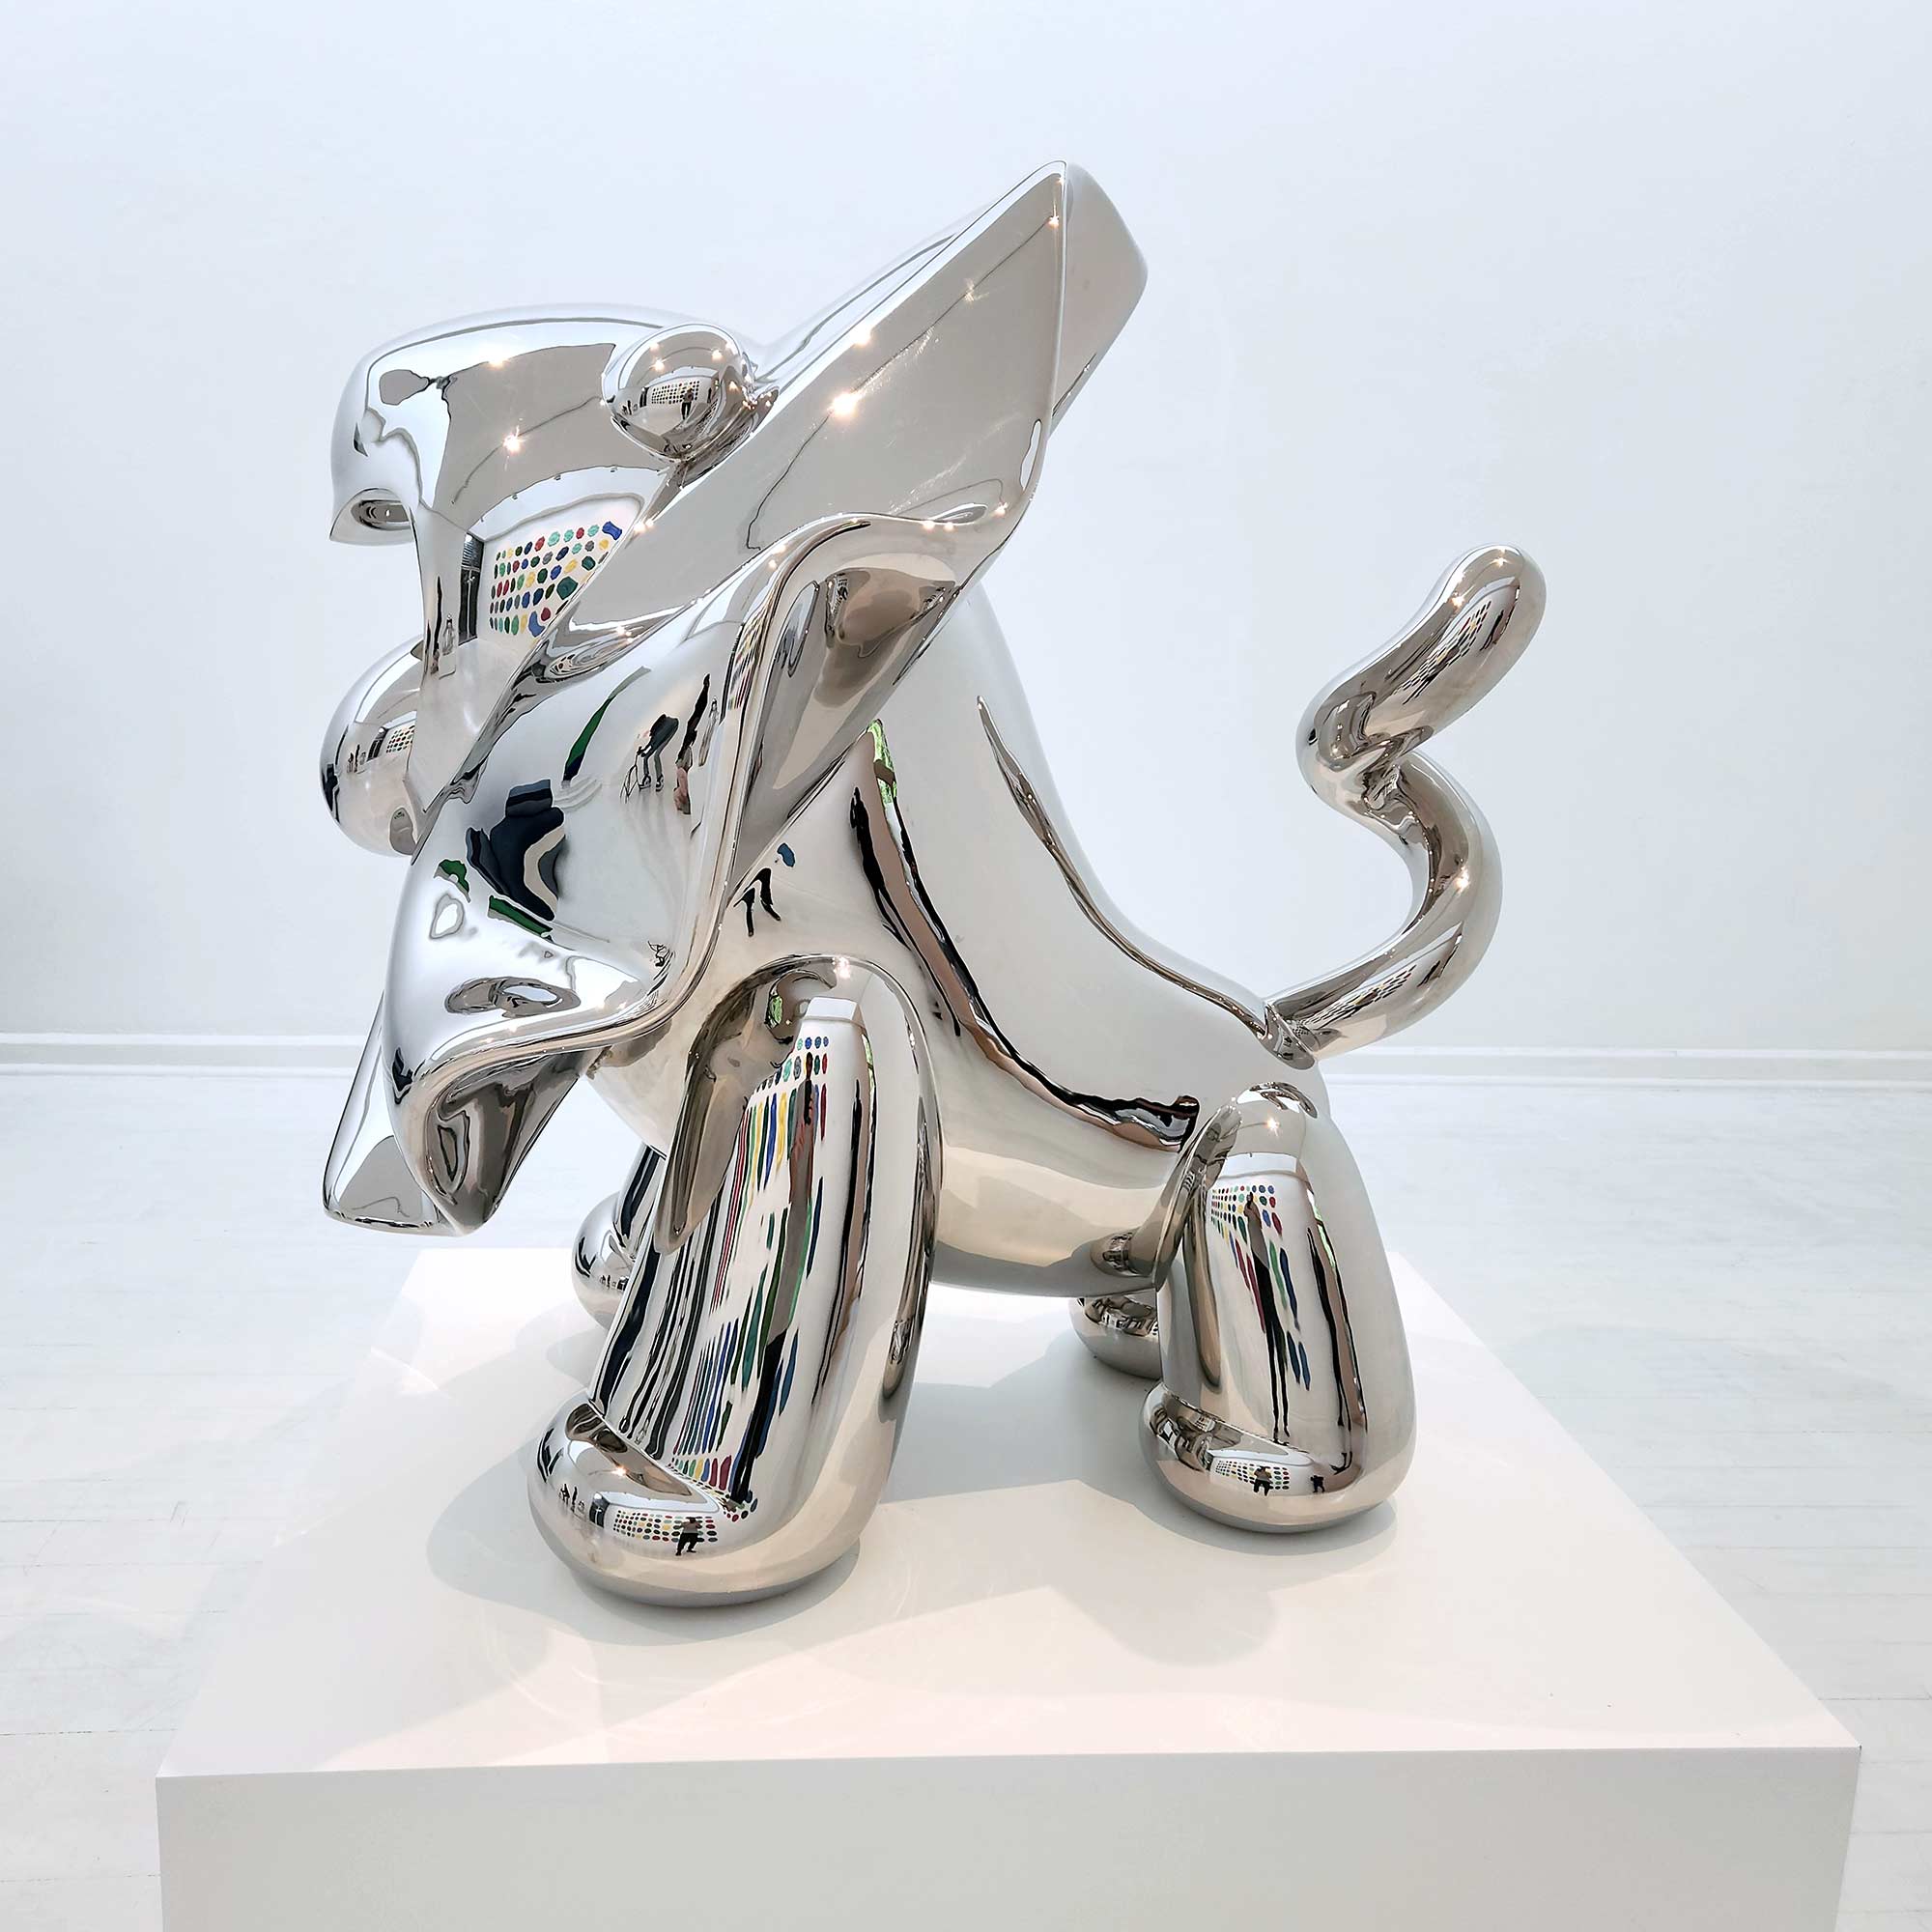 Lions breath polished stainless steel sculpture large size by Ferdi B Dick , side view